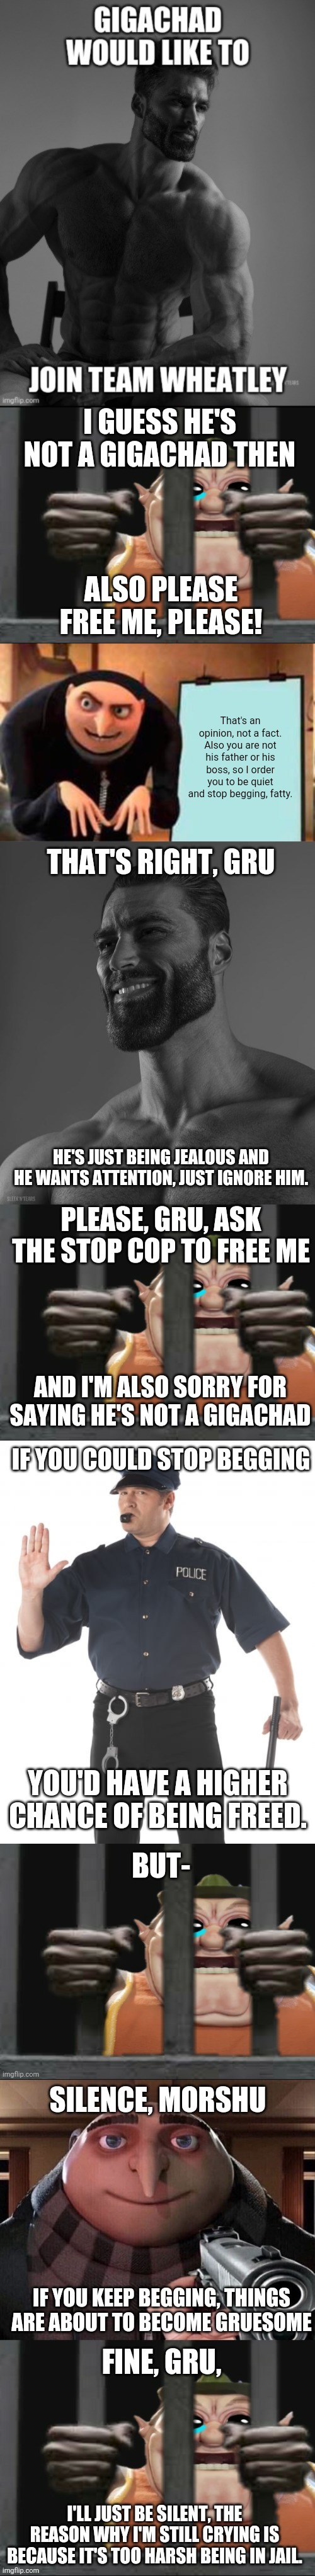 Your opinion doesn't change the fact that he's a Gigachad, wigglytuff ...